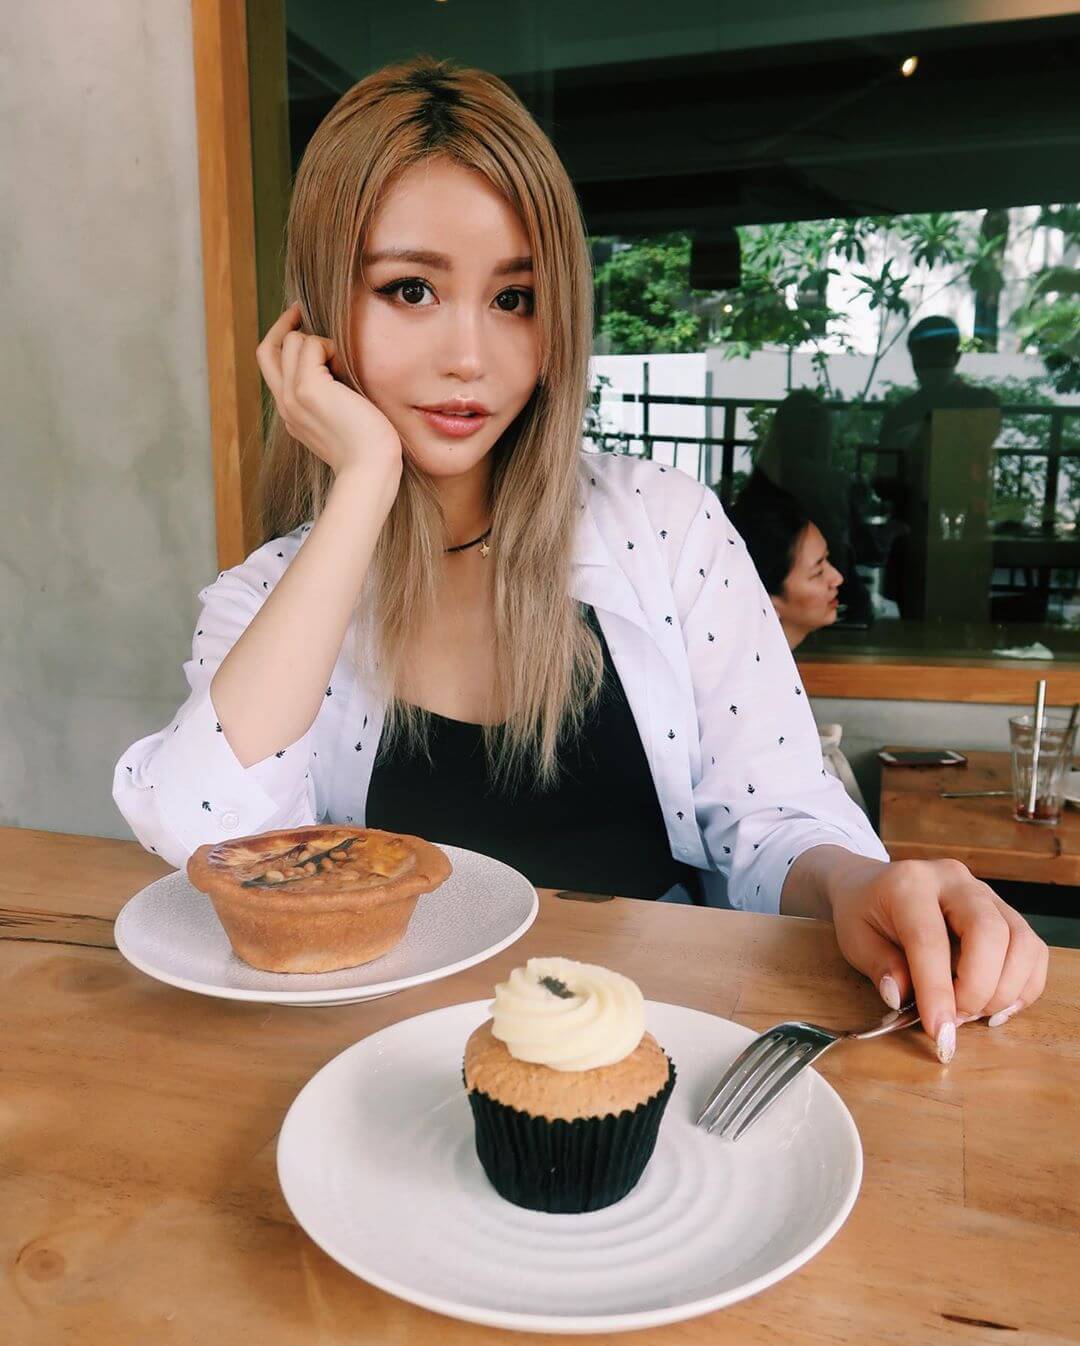 51 Hot Pictures Of Wengie Are A Genuine Masterpiece 21